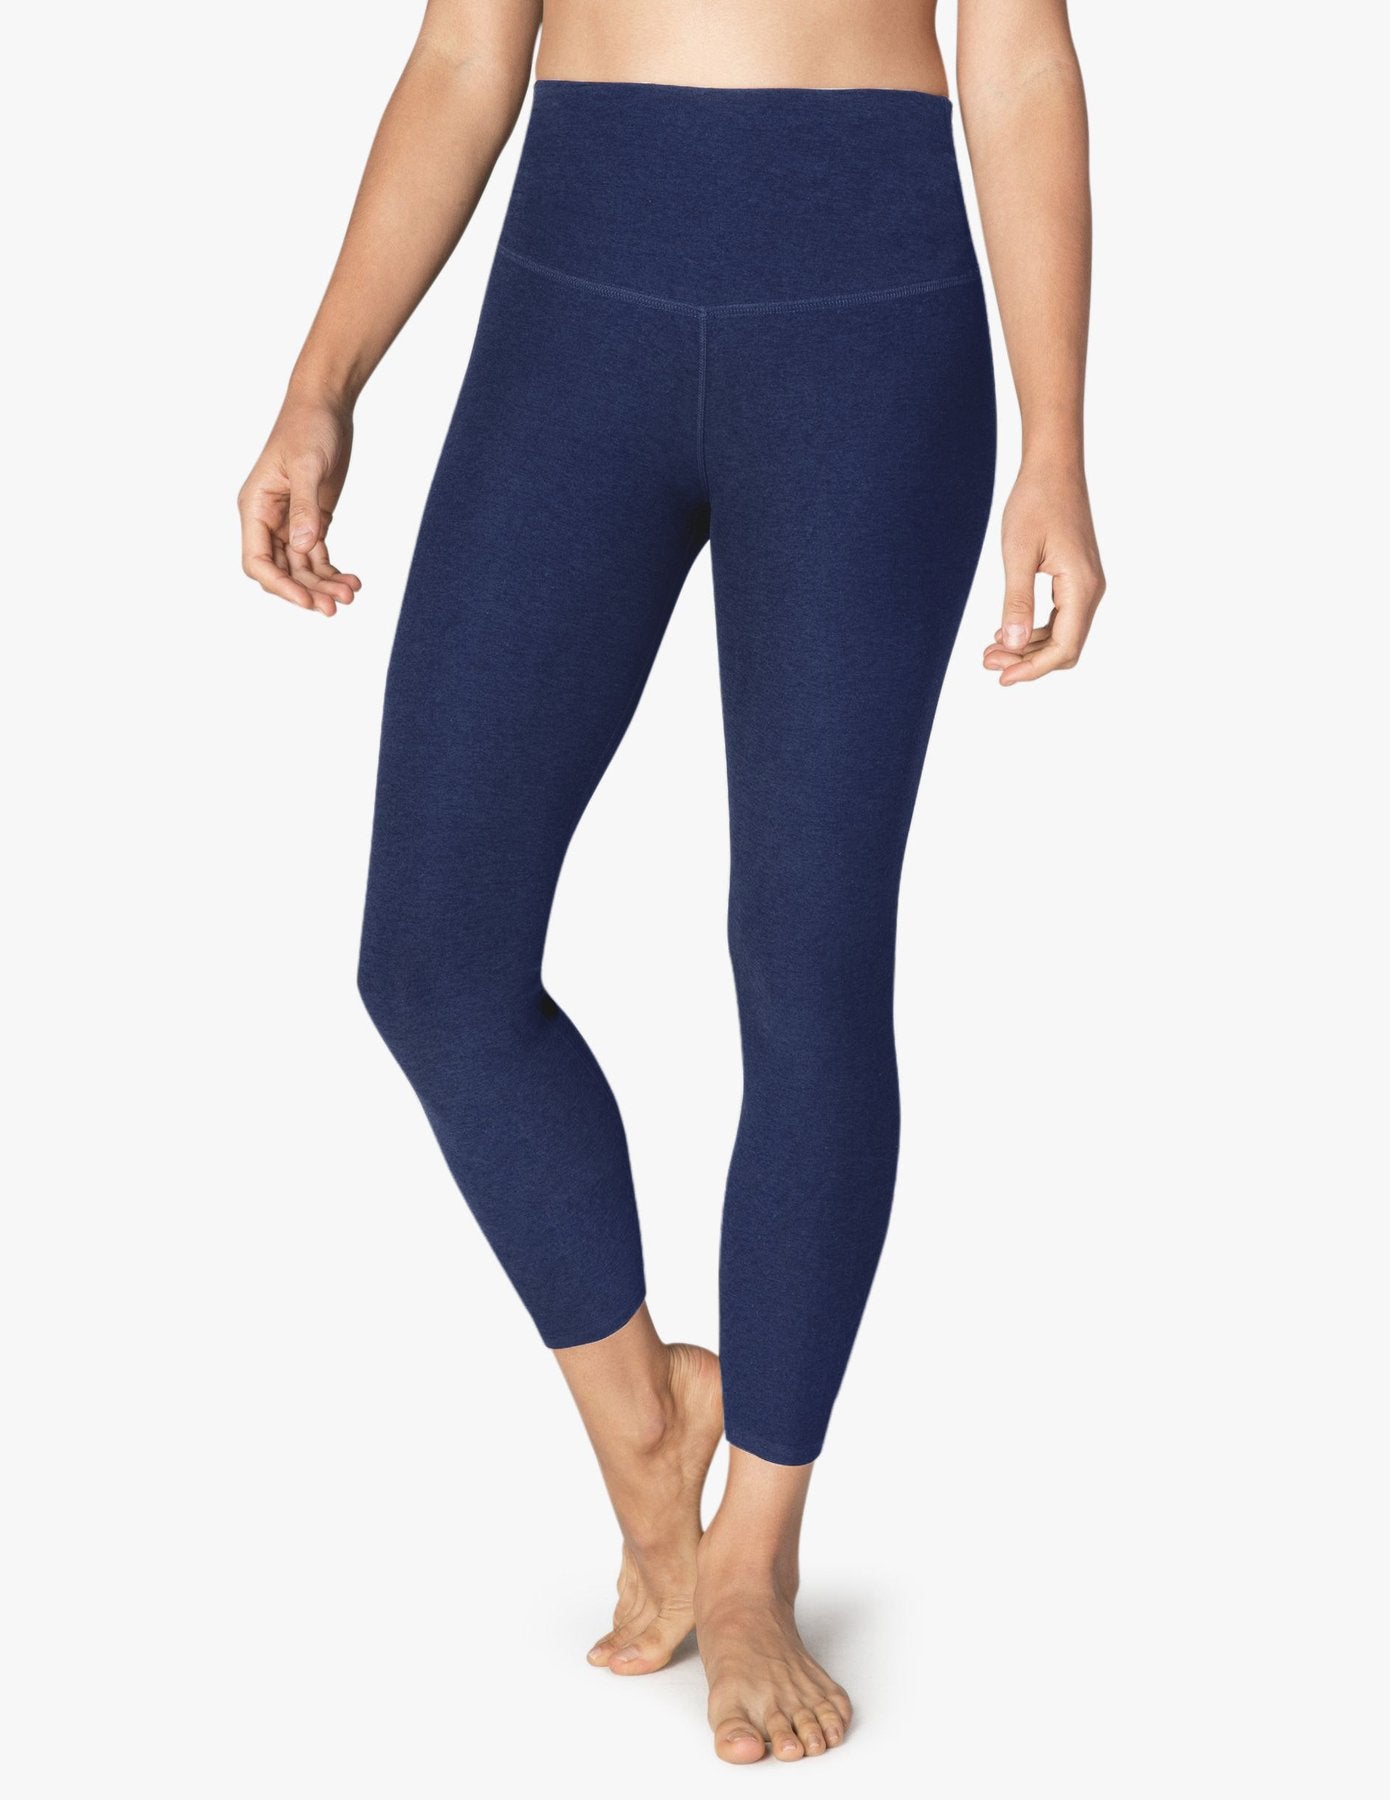 BEYOND YOGA SPACEDYE CAUGHT IN THE MIDI HIGH WAISTED LEGGING NOCTURNAL NAVY